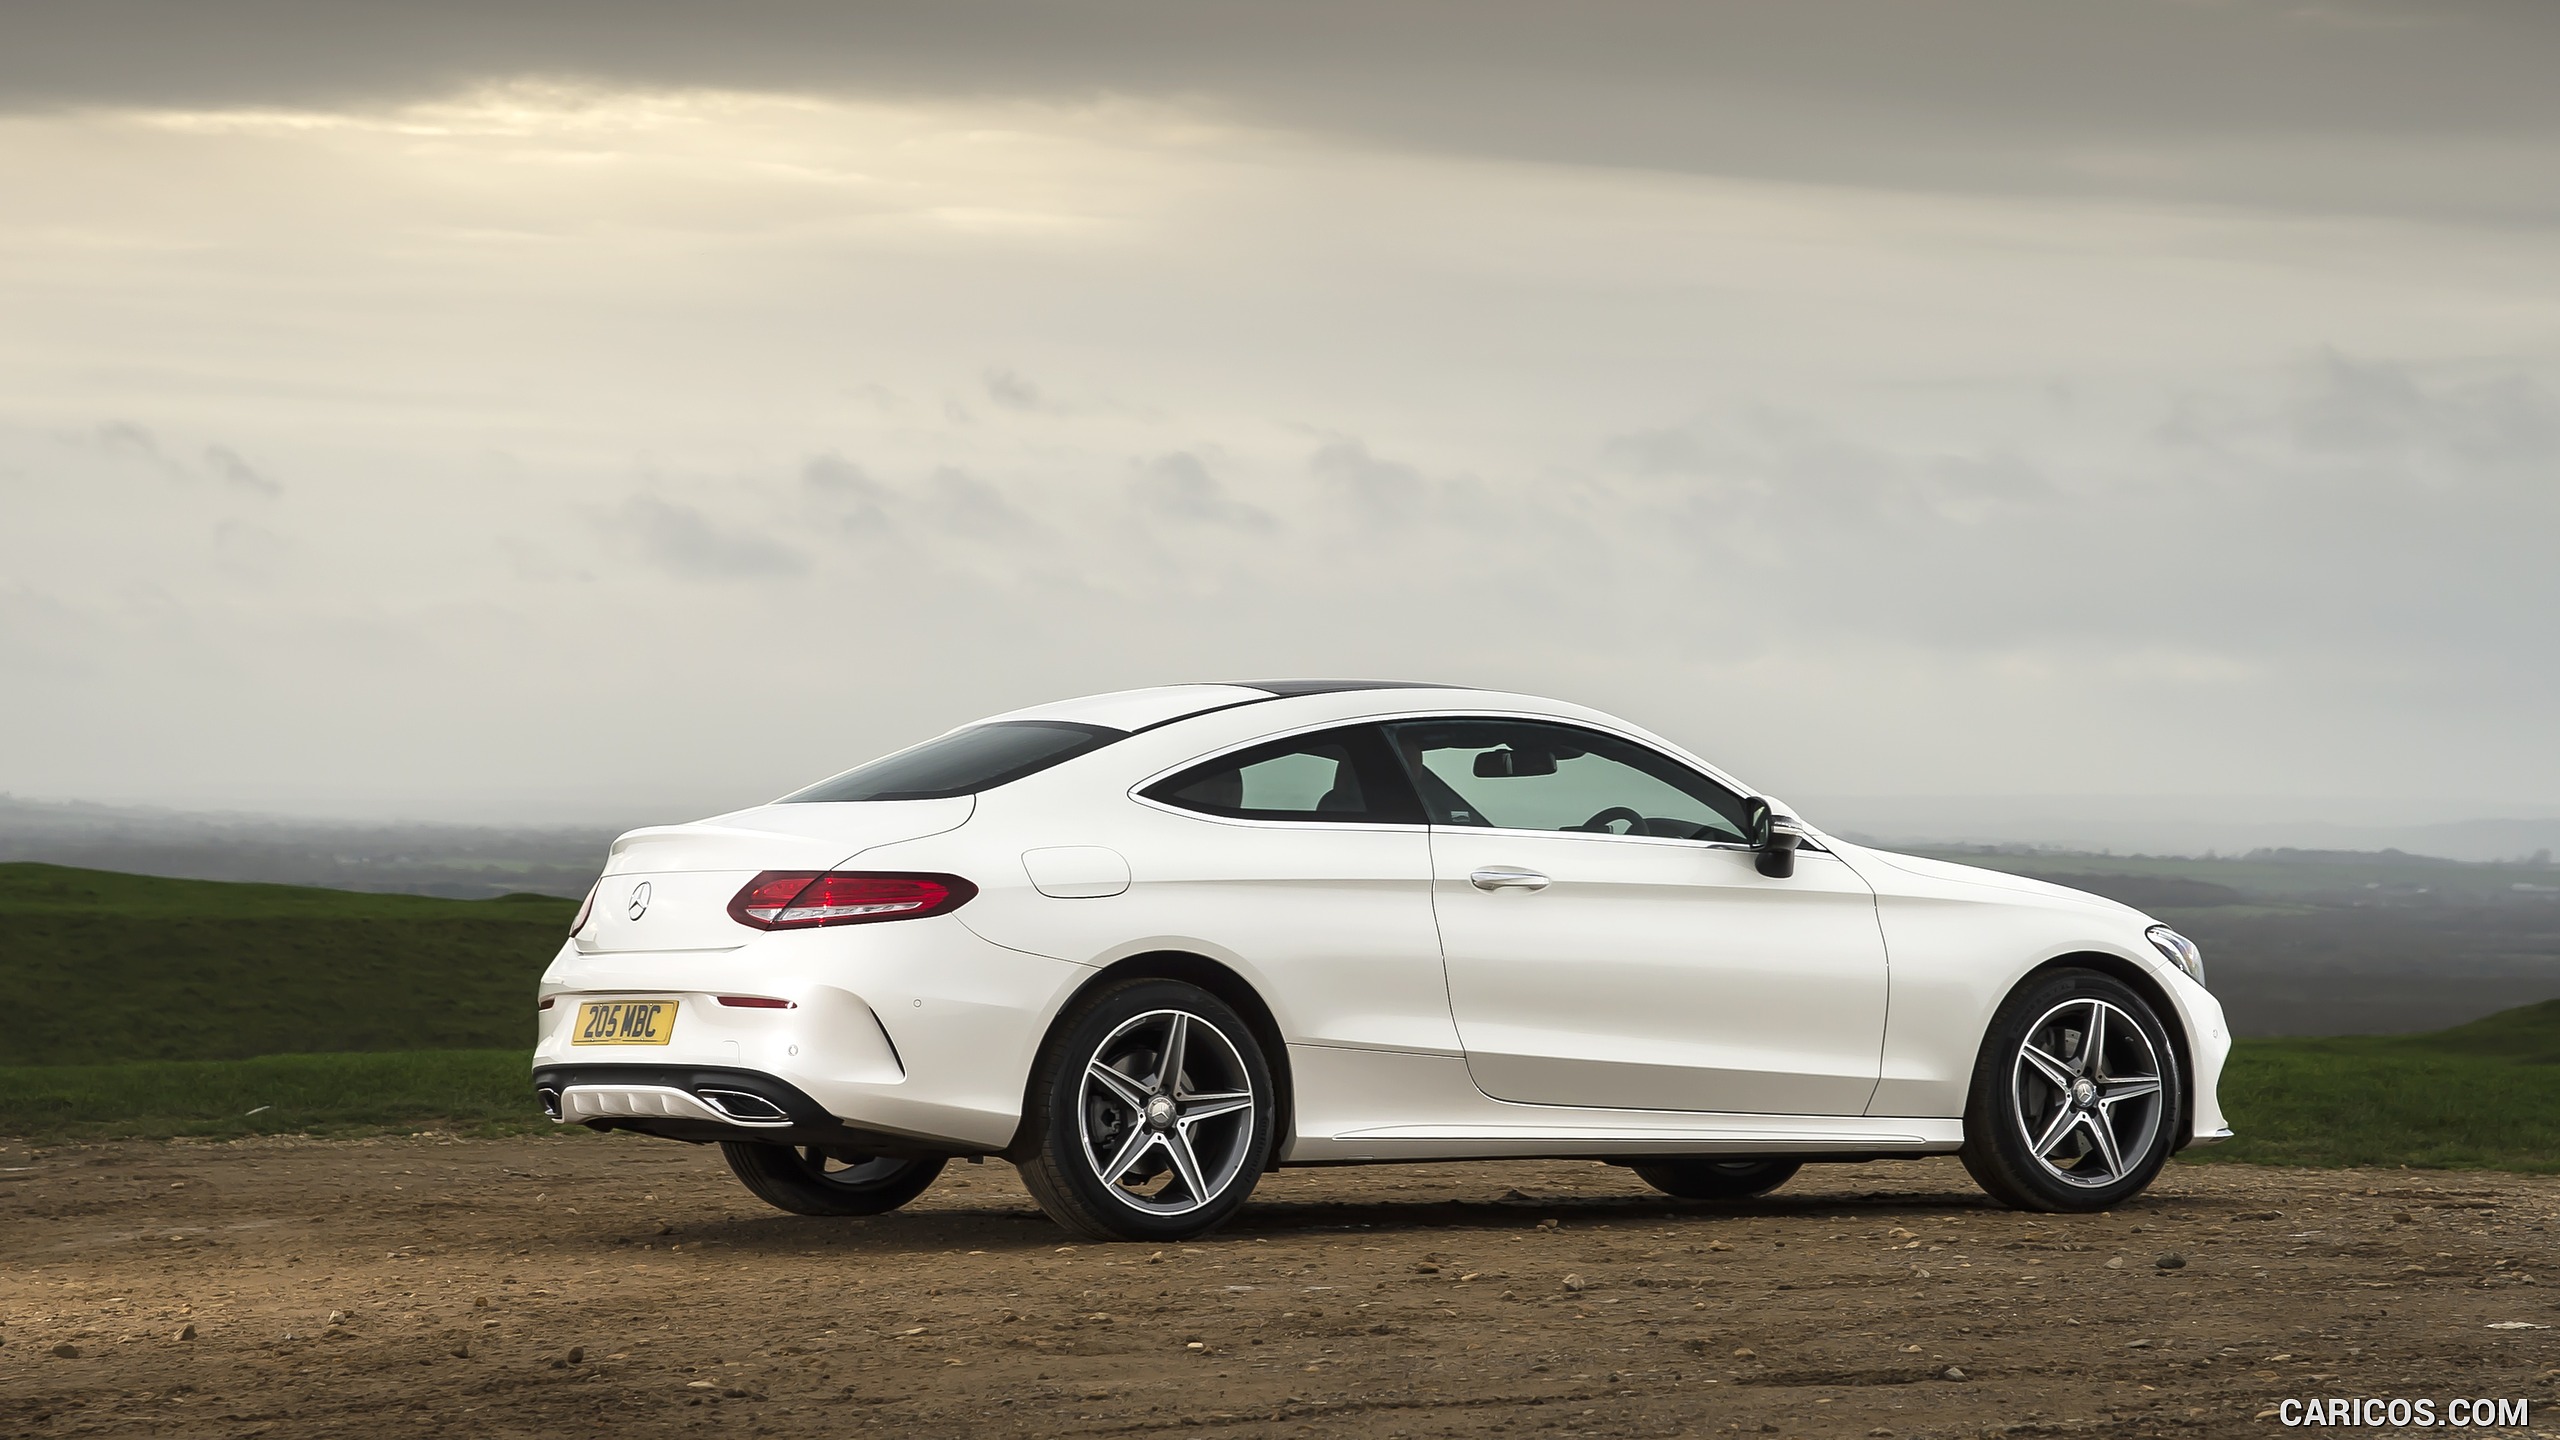 2017 Mercedes-Benz C-Class Coupe (UK-Spec) - Side, #119 of 210